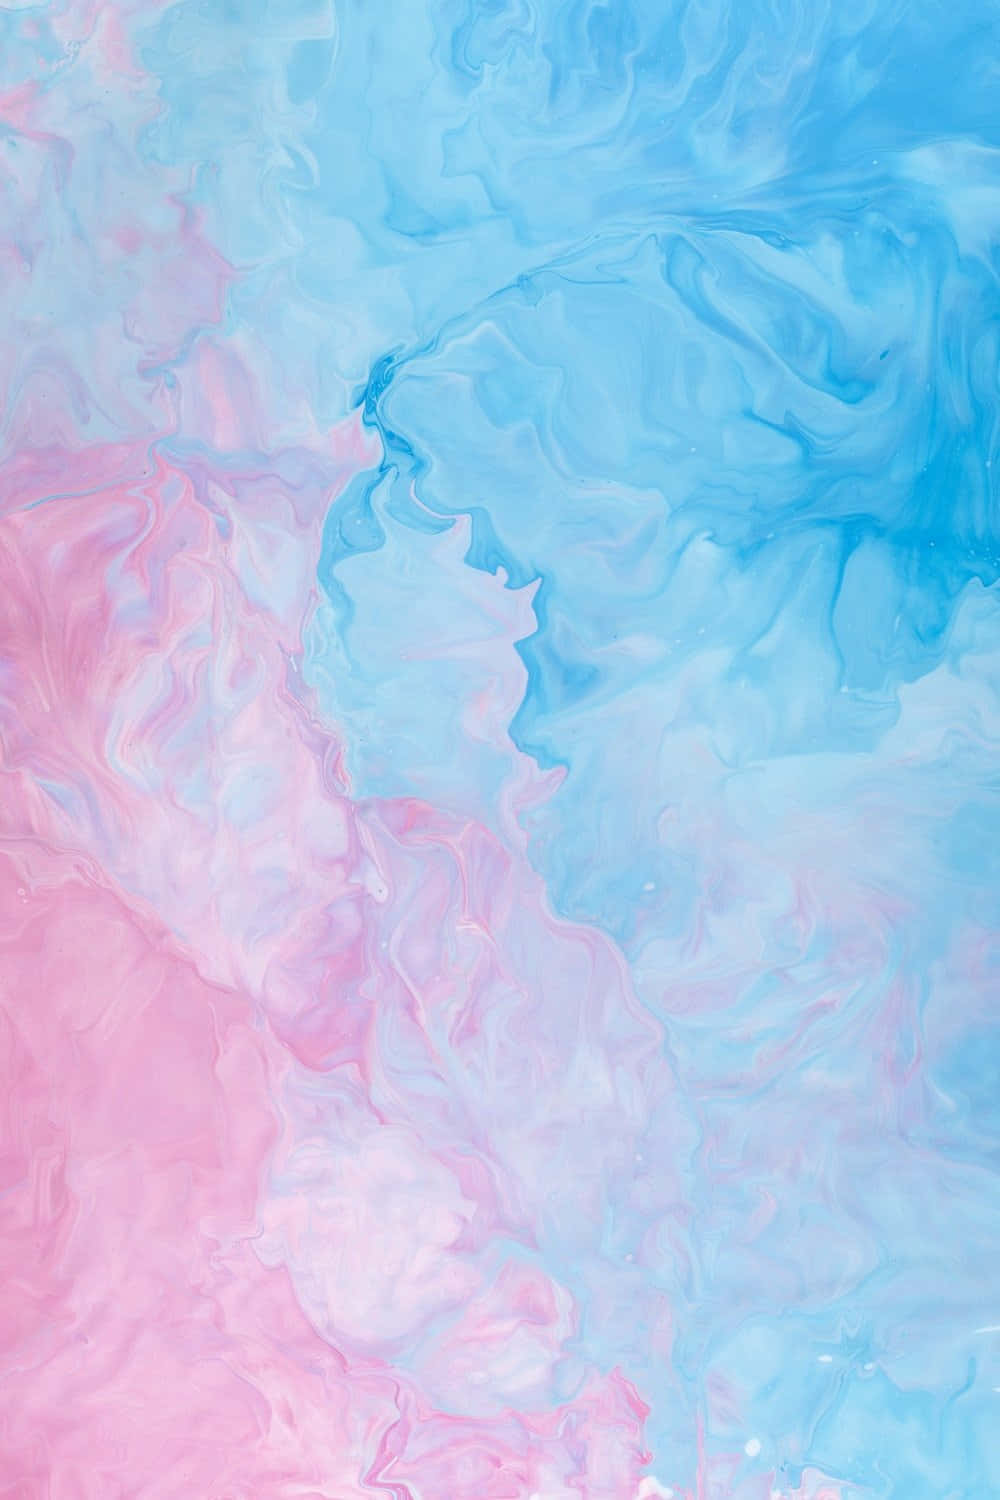 An image of a dream-like background featuring soft pastel blue and pink hues Wallpaper